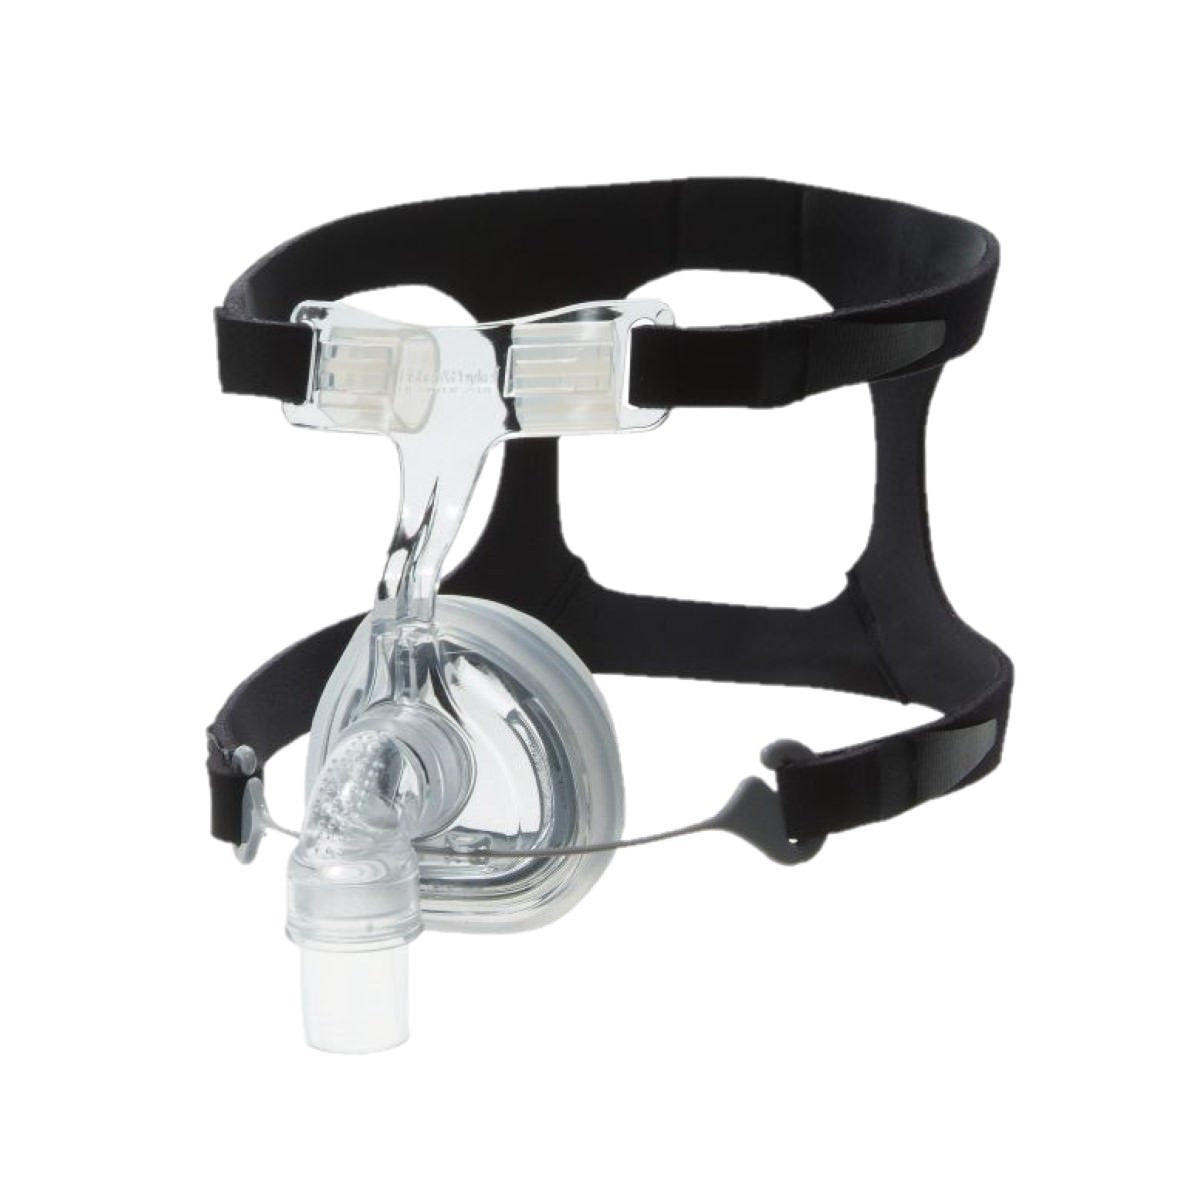 Fisher & Paykel FlexiFit 407 Nasal Mask System with Headgear